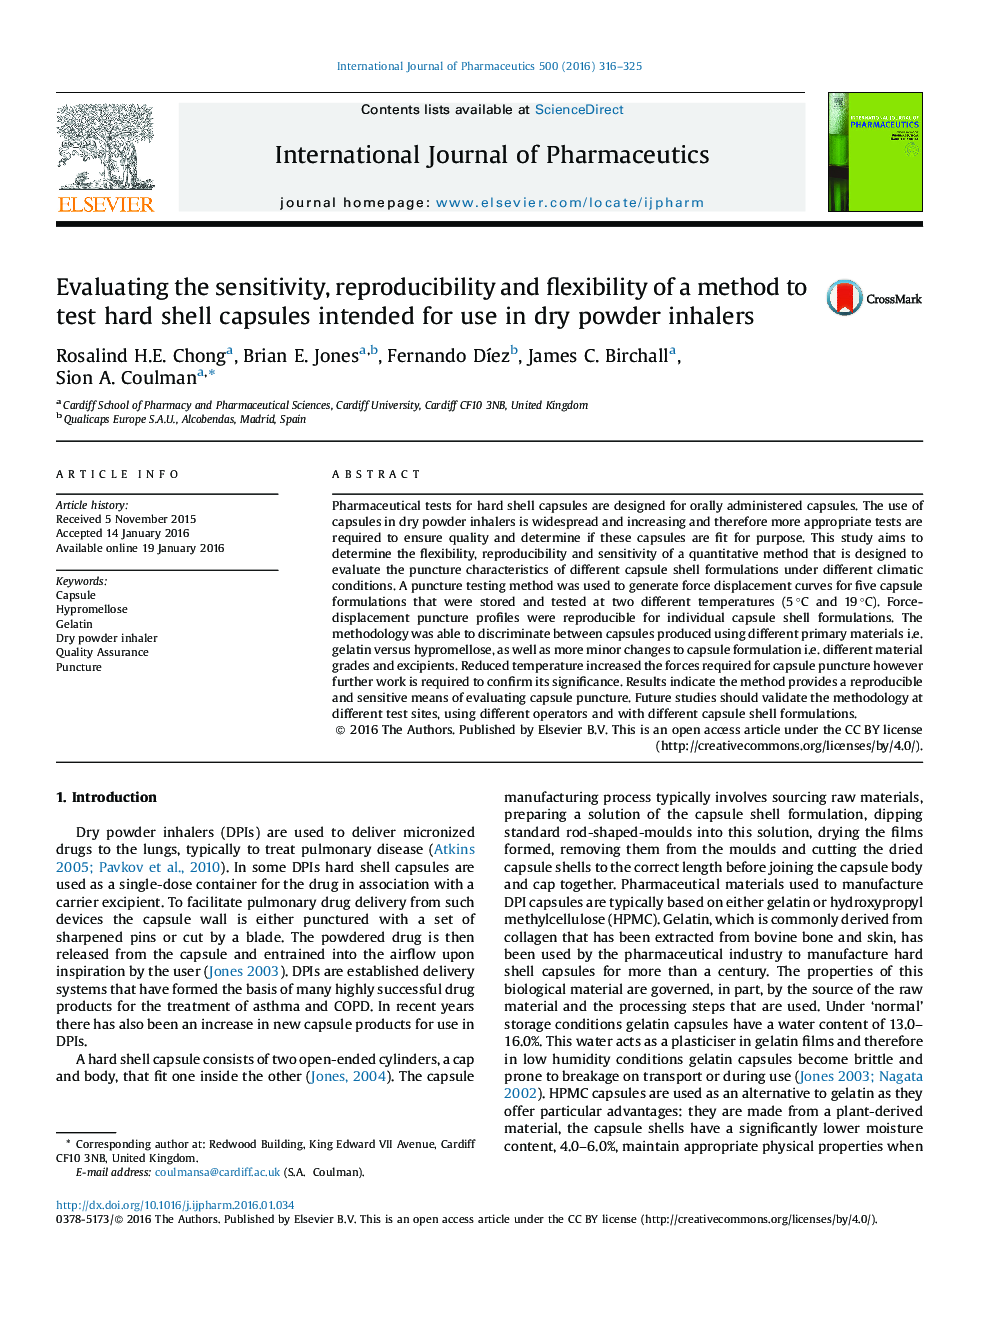 Evaluating the sensitivity, reproducibility and flexibility of a method to test hard shell capsules intended for use in dry powder inhalers